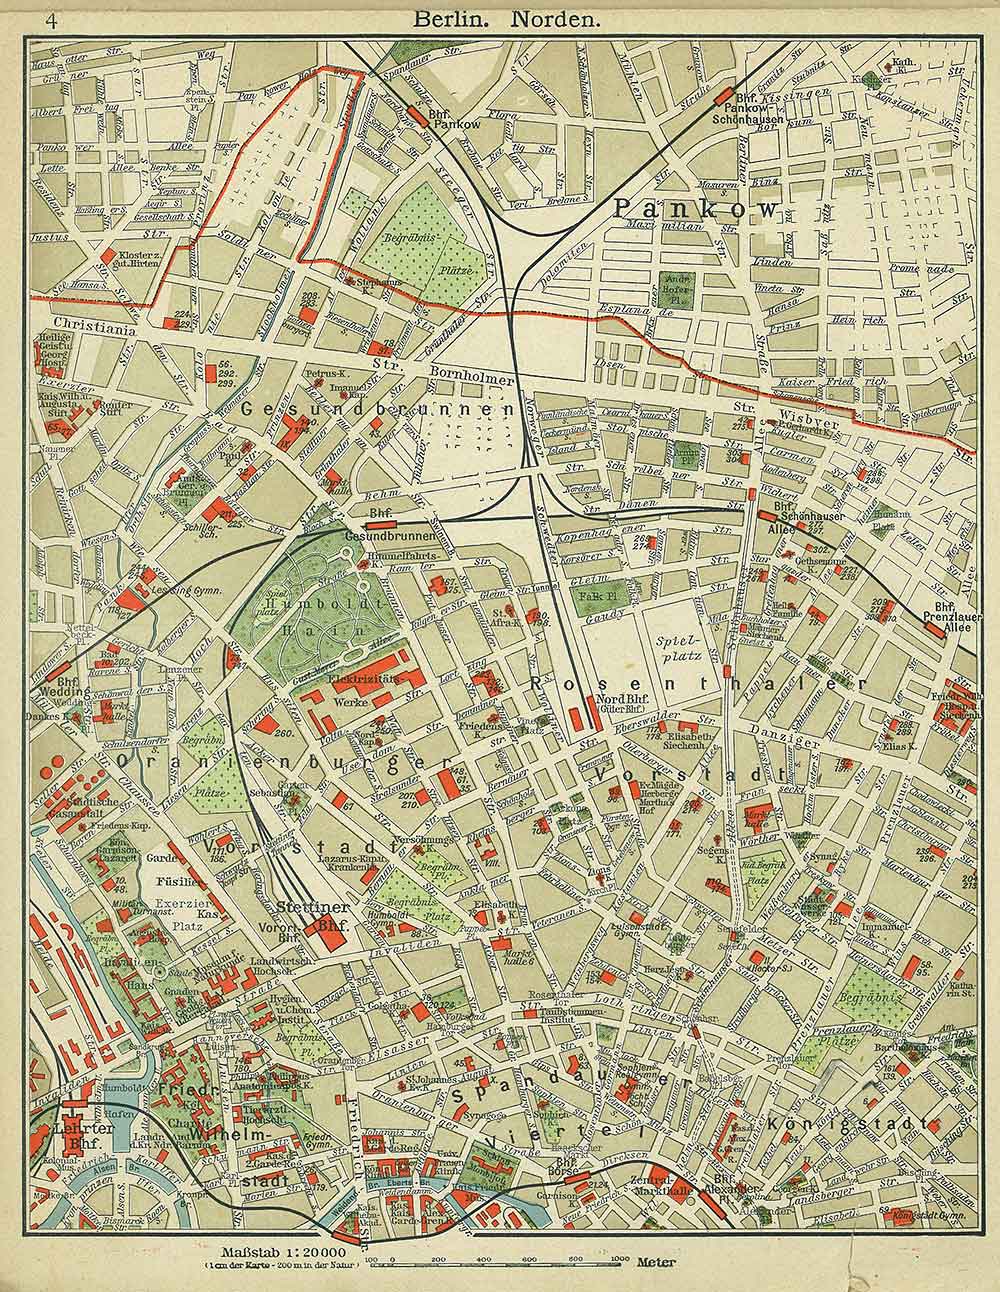 Berlin North, Andrees 'Berliner Schul-Atlas', 1916, page 4, published size to print borders 21.28 cm wide by 27.79 cm high.